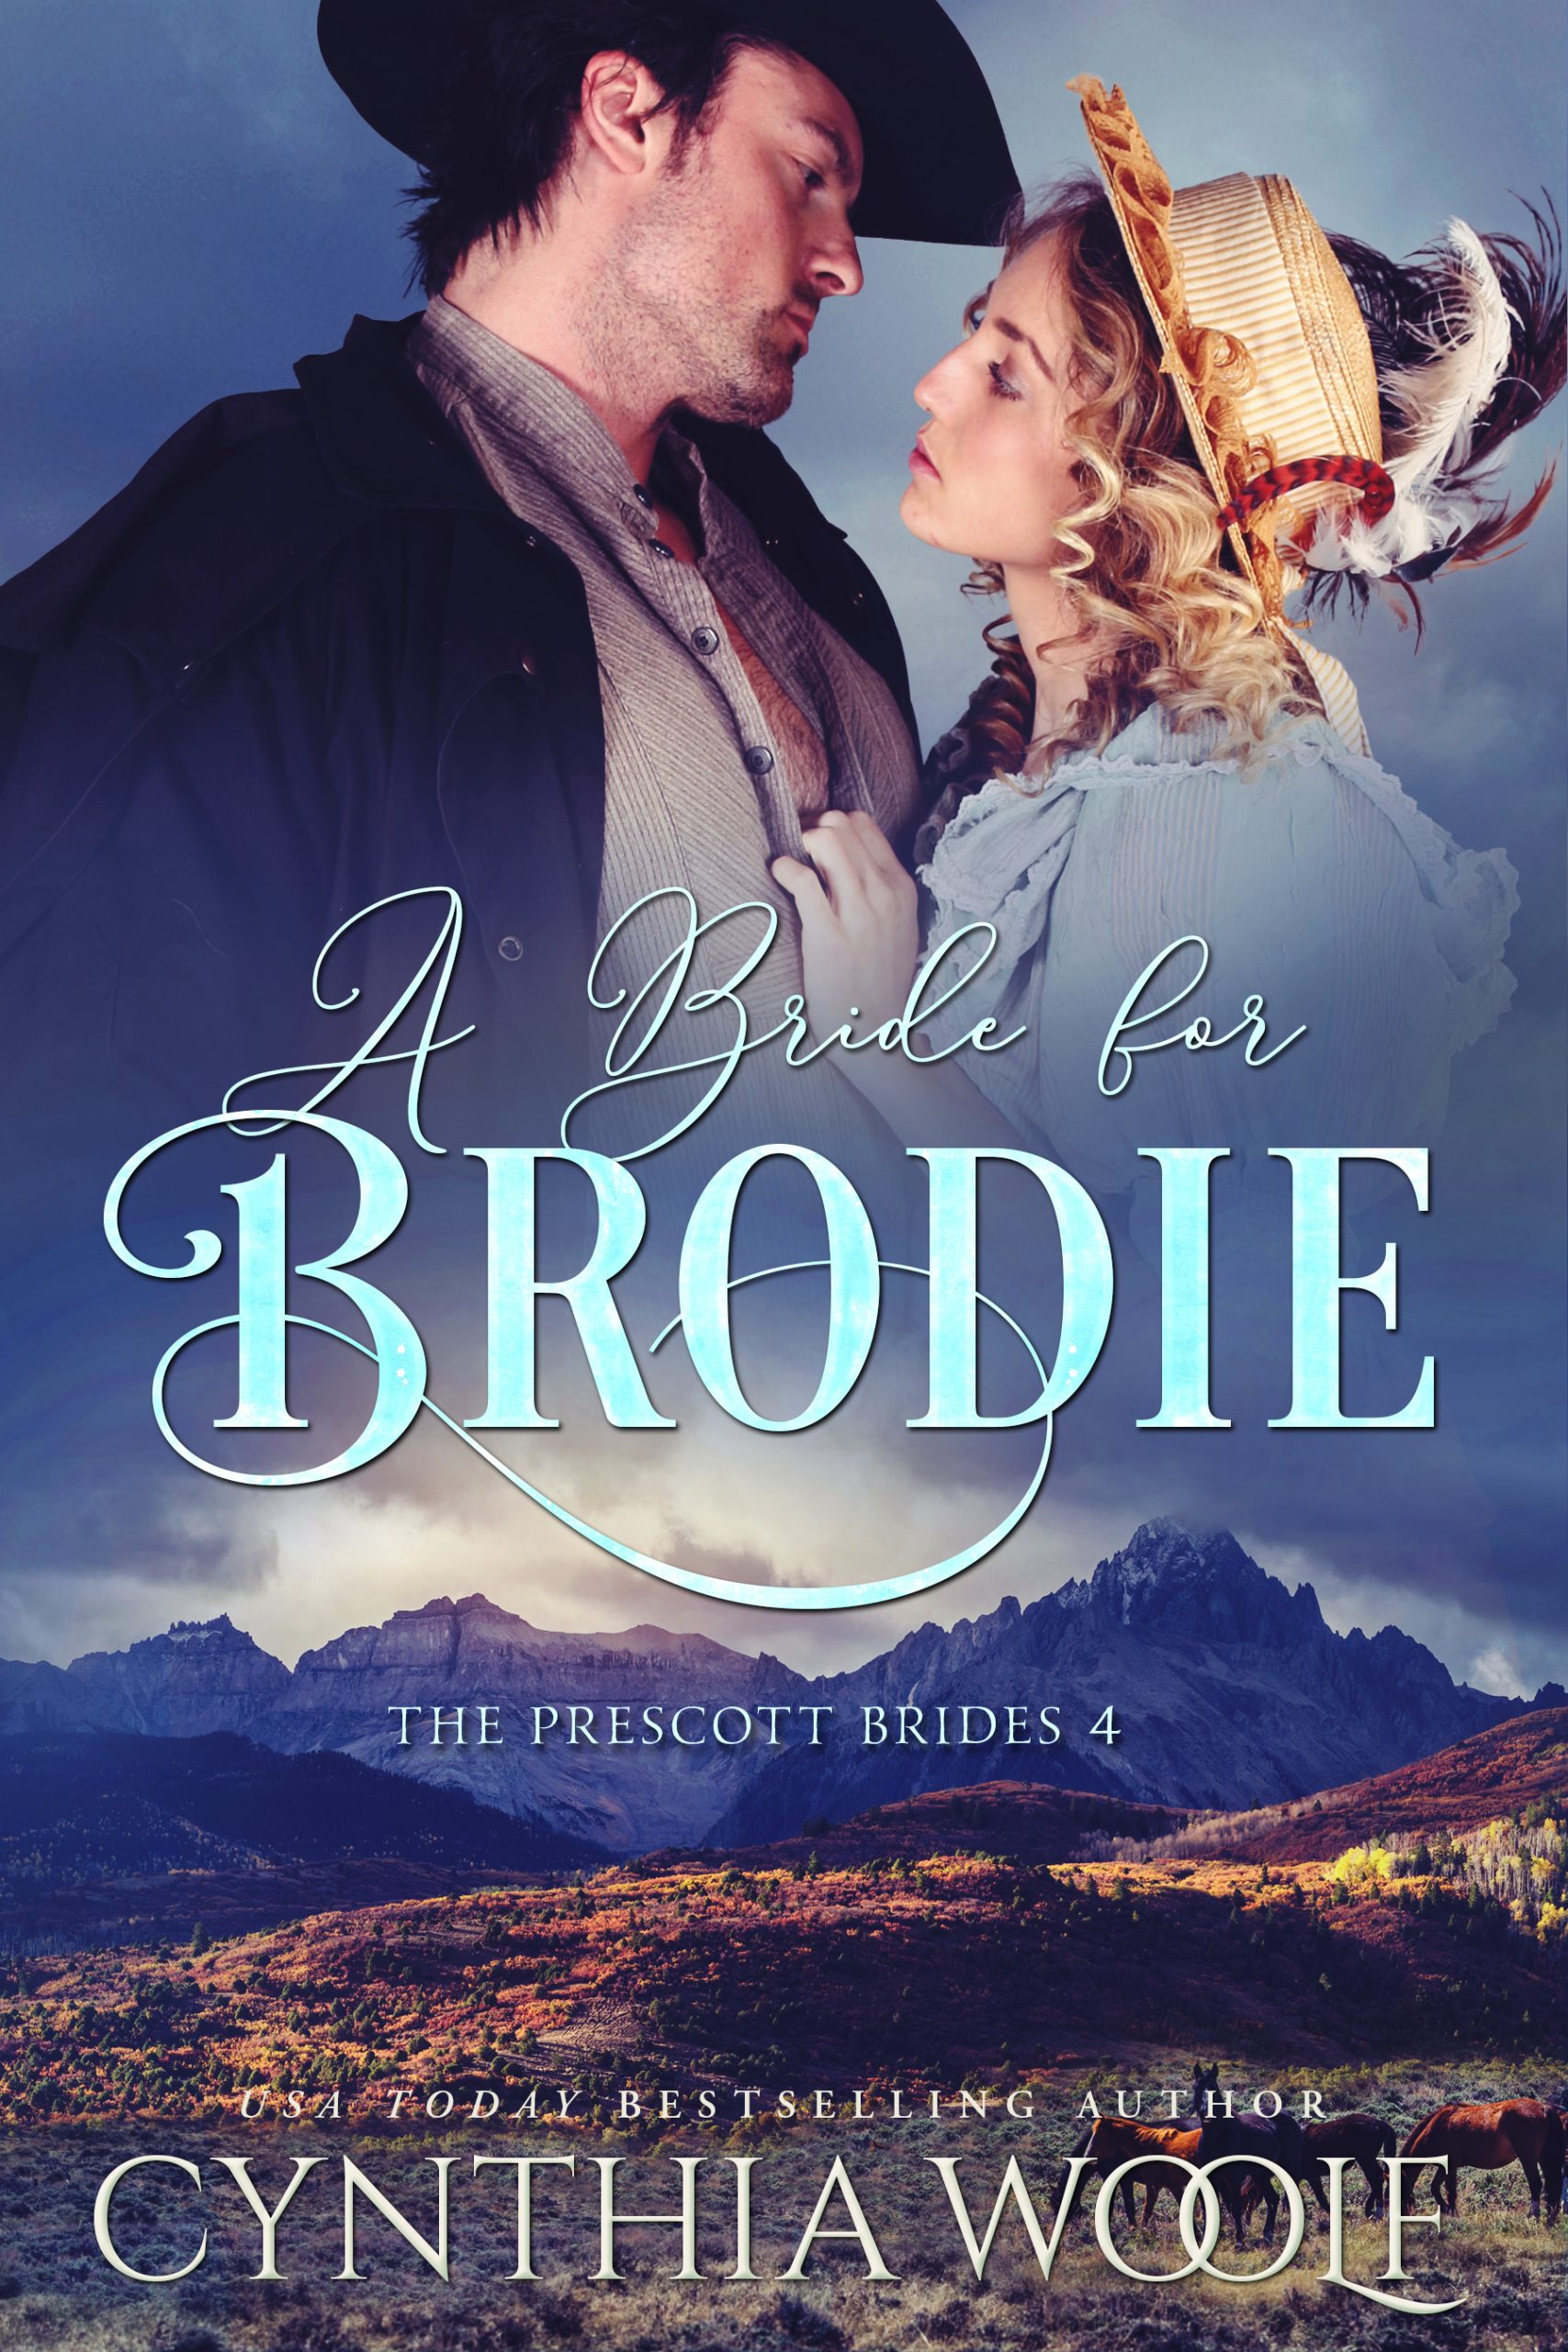 A Bride for Brodie by Cynthia Woolf PDF Download Video Library